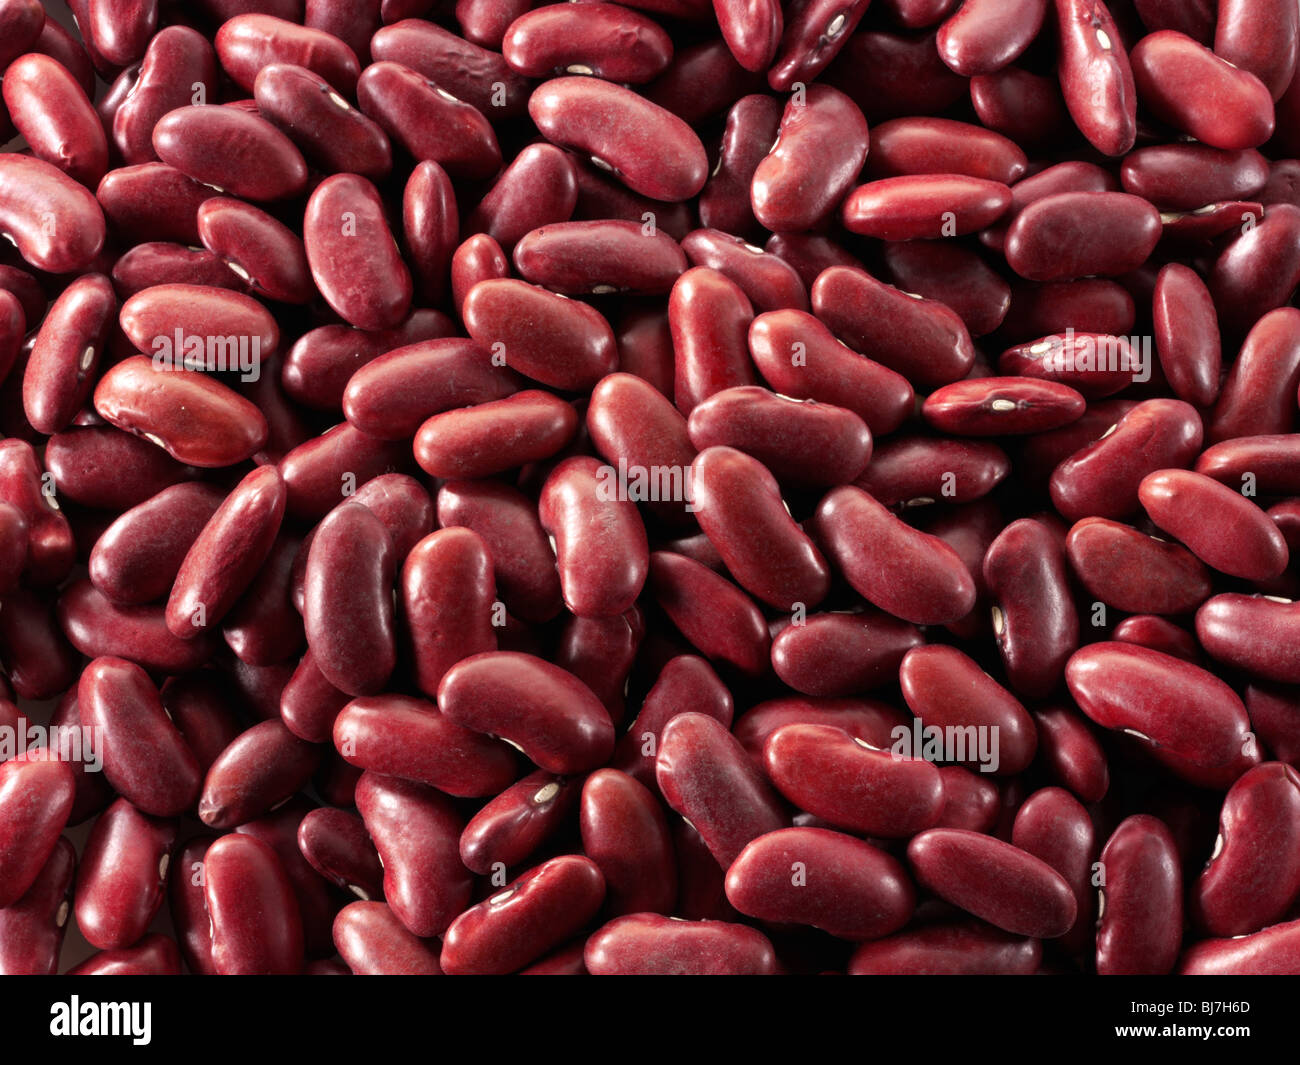 Whole dried red kidney beans - close up full frame top shot  (Phaseolus vulgaris) Stock Photo